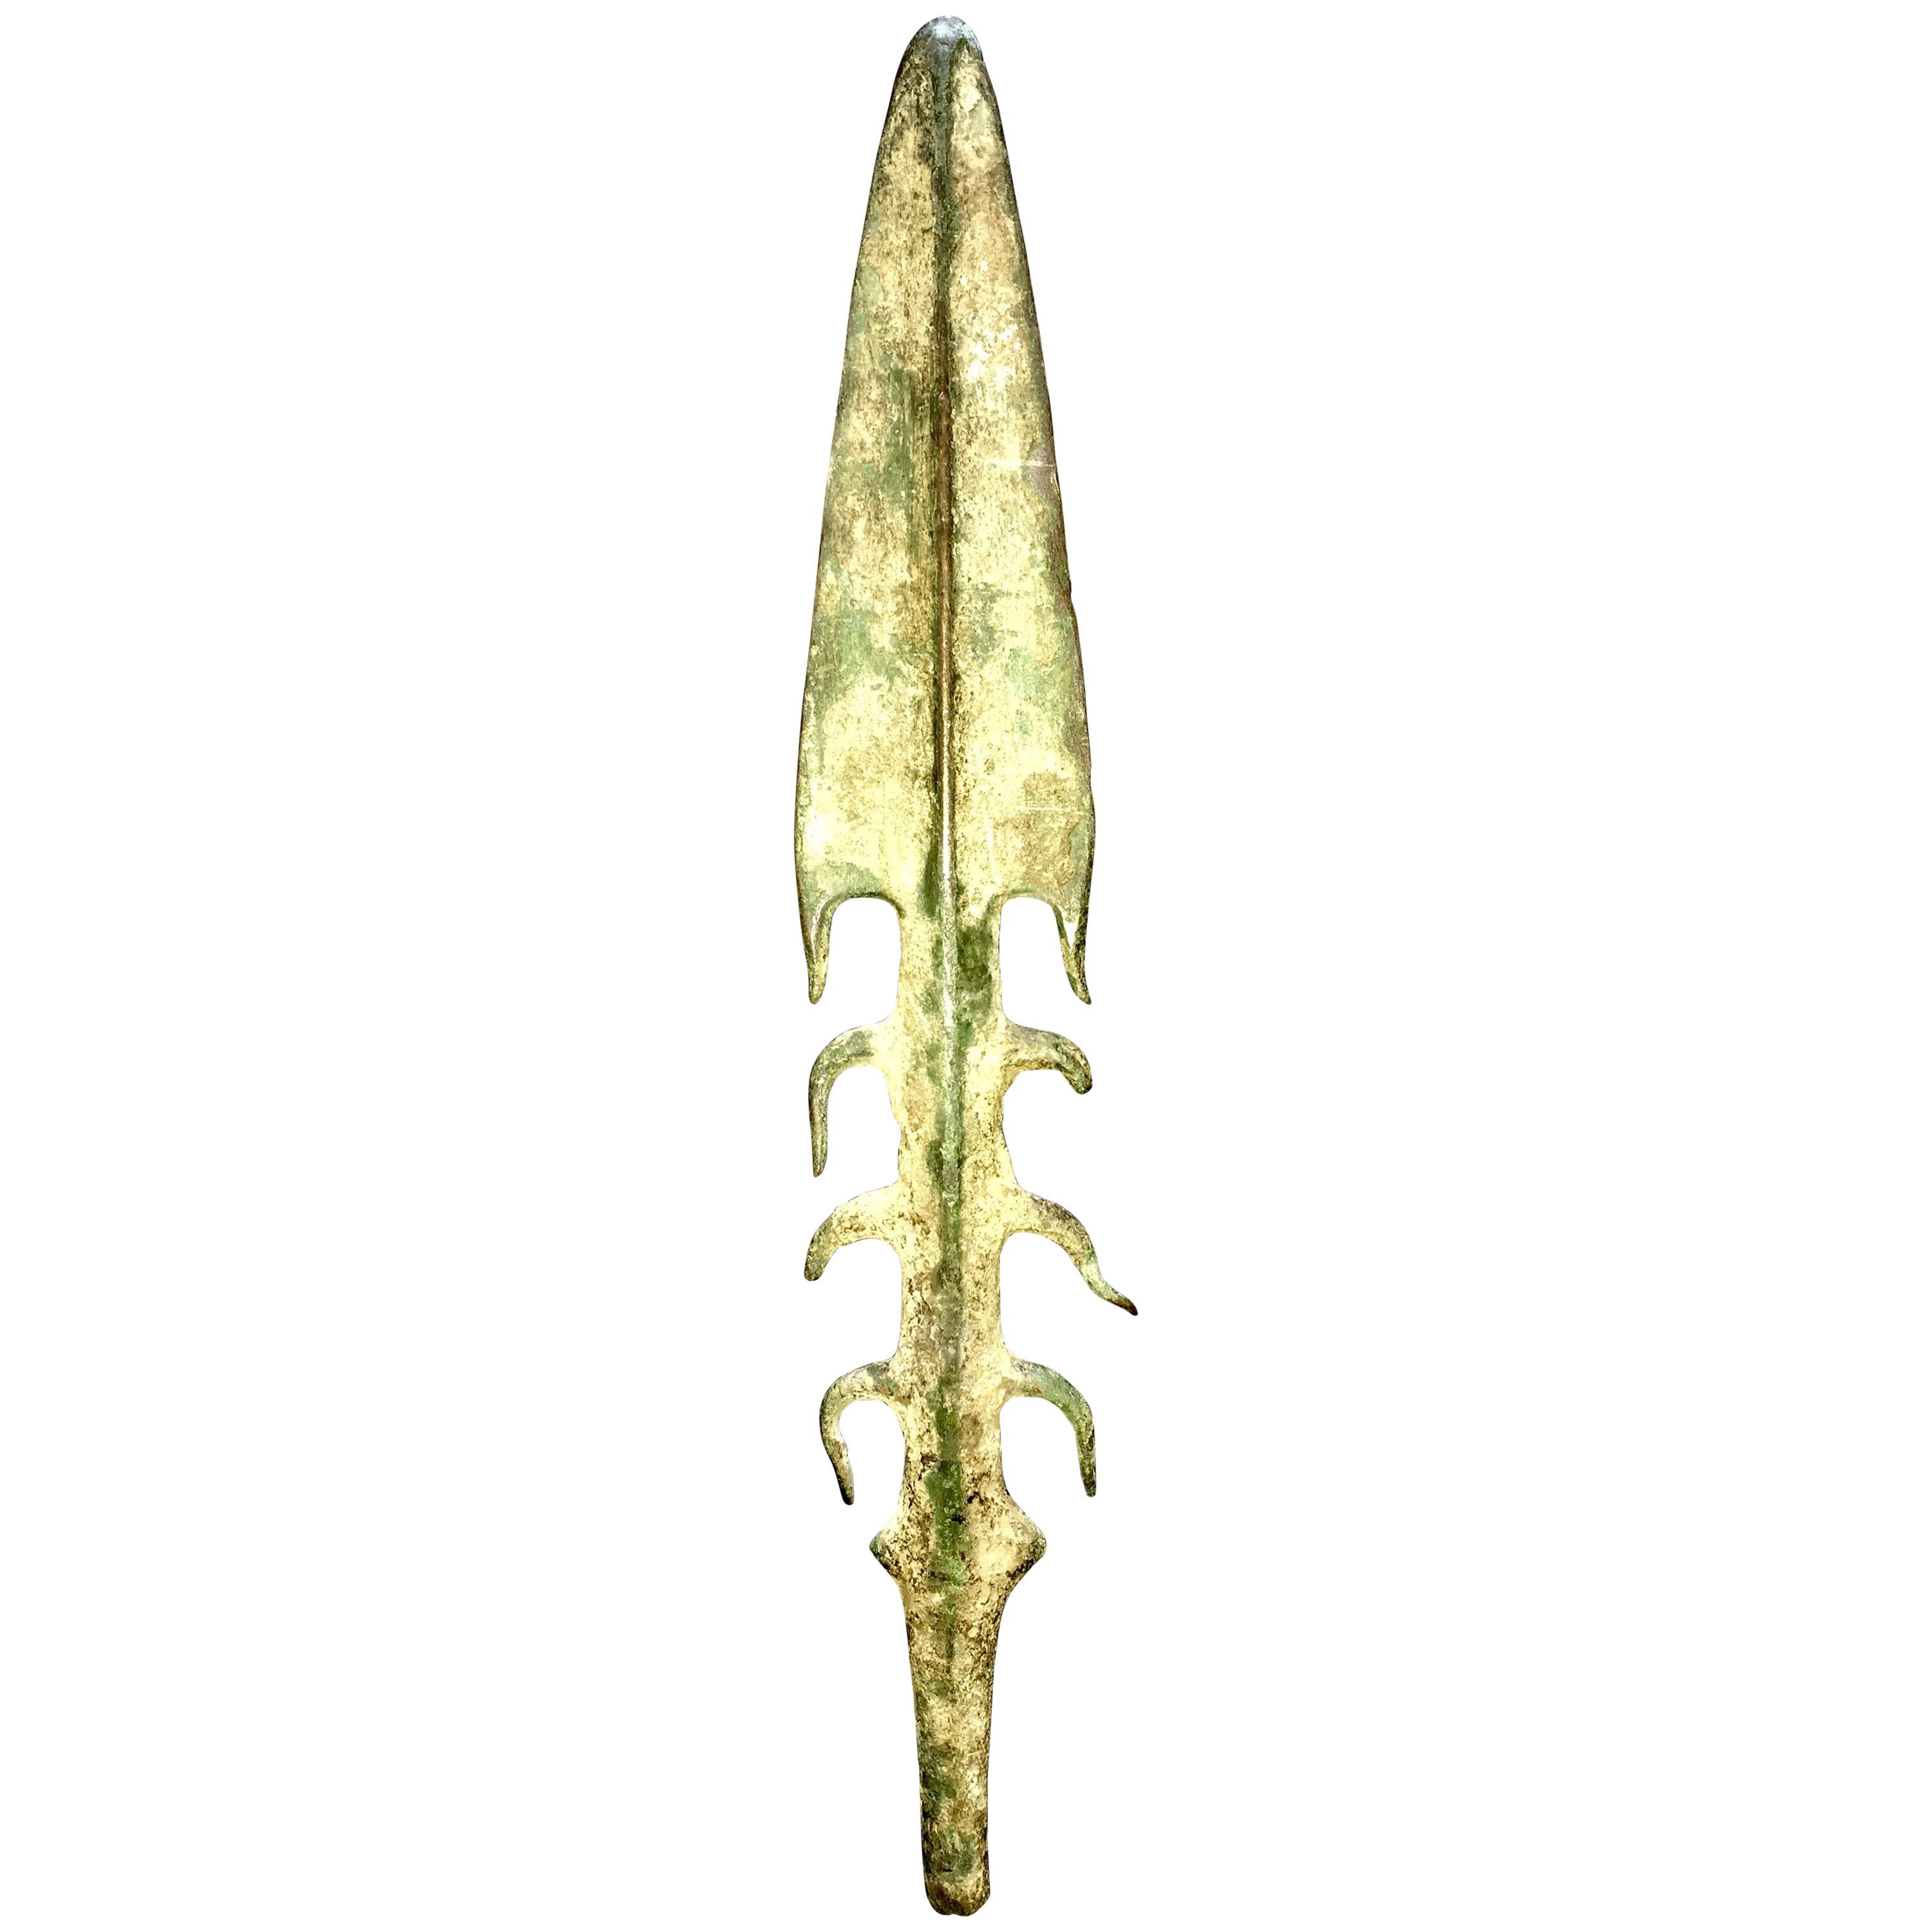 Very Important Indo-Gangetic Bronze Spearhead, India, Bronze Age 3, 000 BC